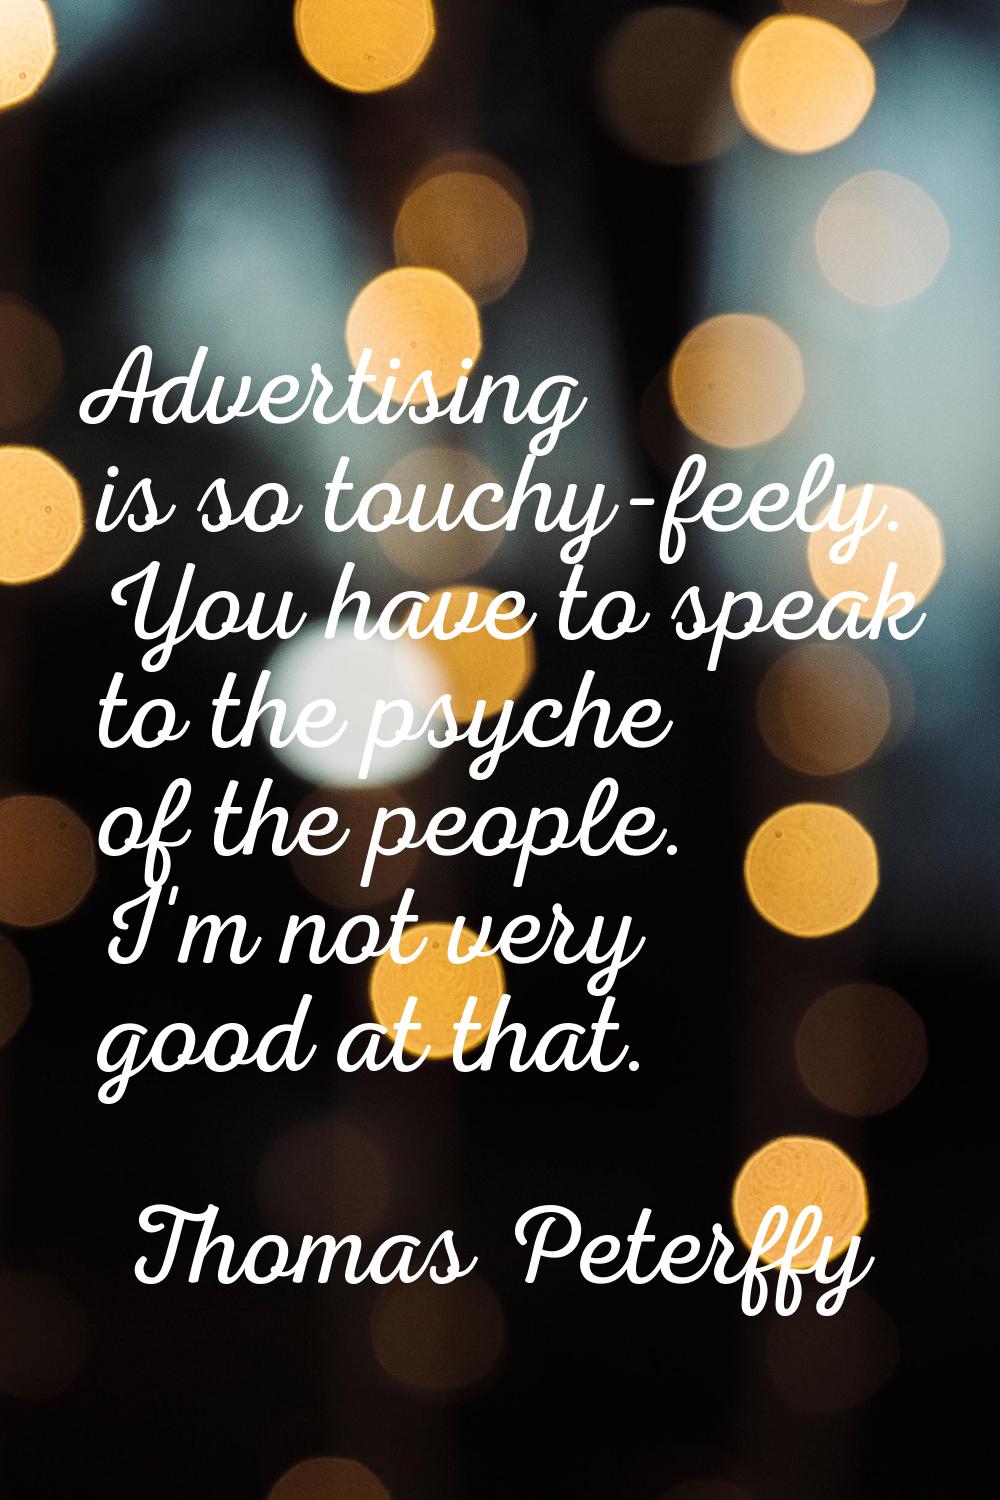 Advertising is so touchy-feely. You have to speak to the psyche of the people. I'm not very good at